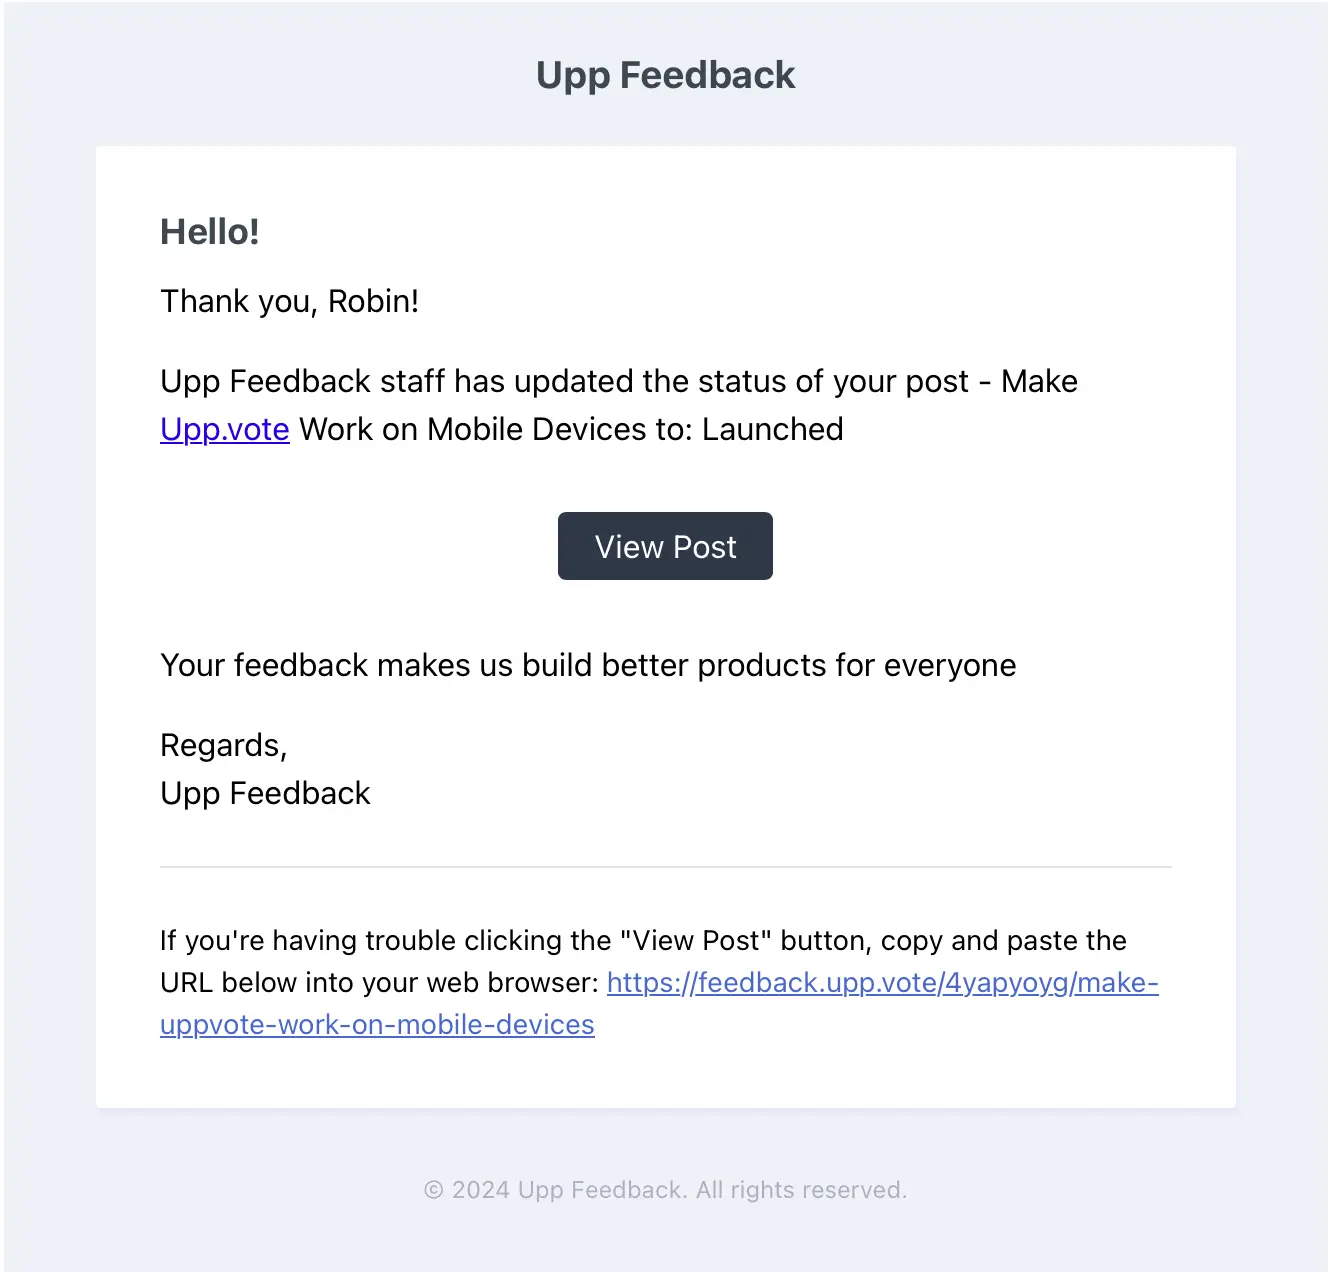 Email Notification on Feedback Post Status Change